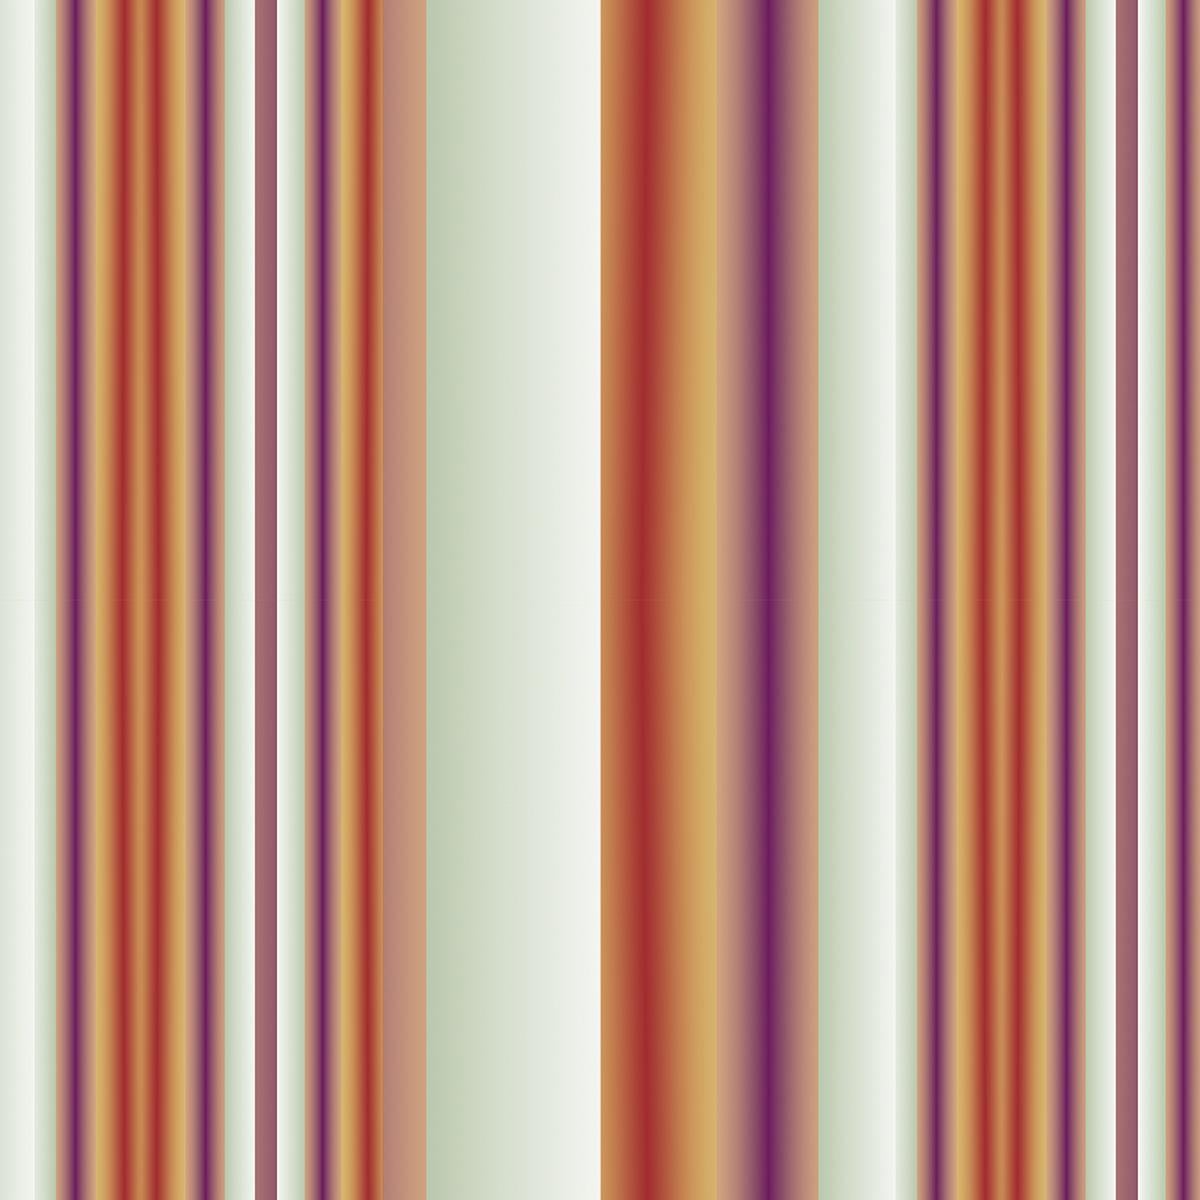 Stripe purple -orange
Inspiration: stripe collection
Material: 100% Polyster Velours
Size 30-60 cm 11,8-23,6 Inch
Inner Pillow : down feathers

Chantal Keizer, the founder of EST1966, is an Amsterdam-based artist known for her collecties. With a